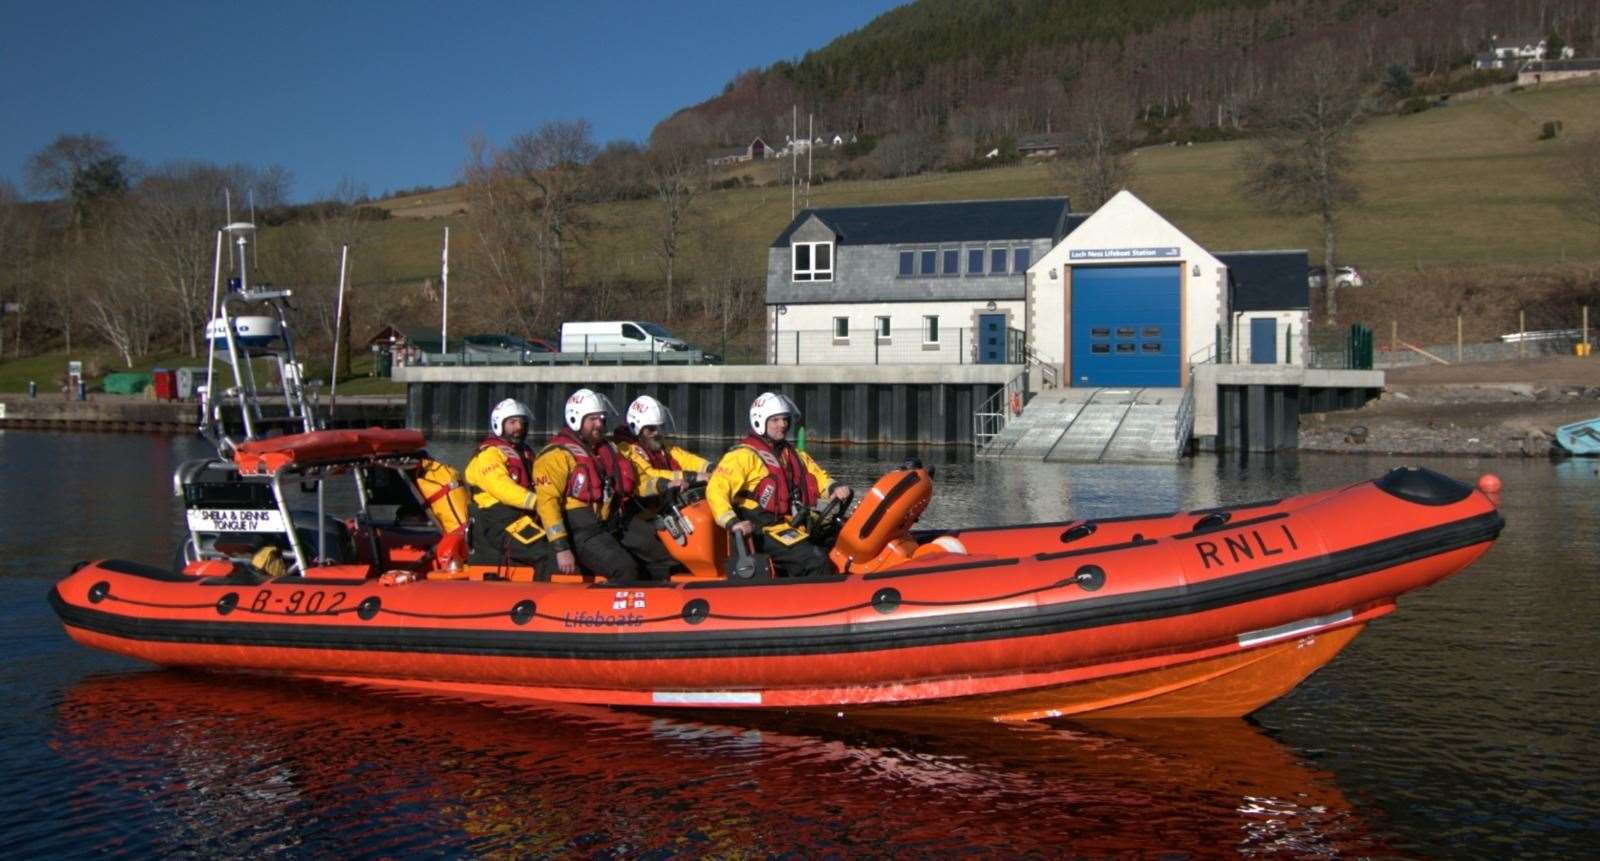 The Loch Ness lifeboat on the water in front of the station.